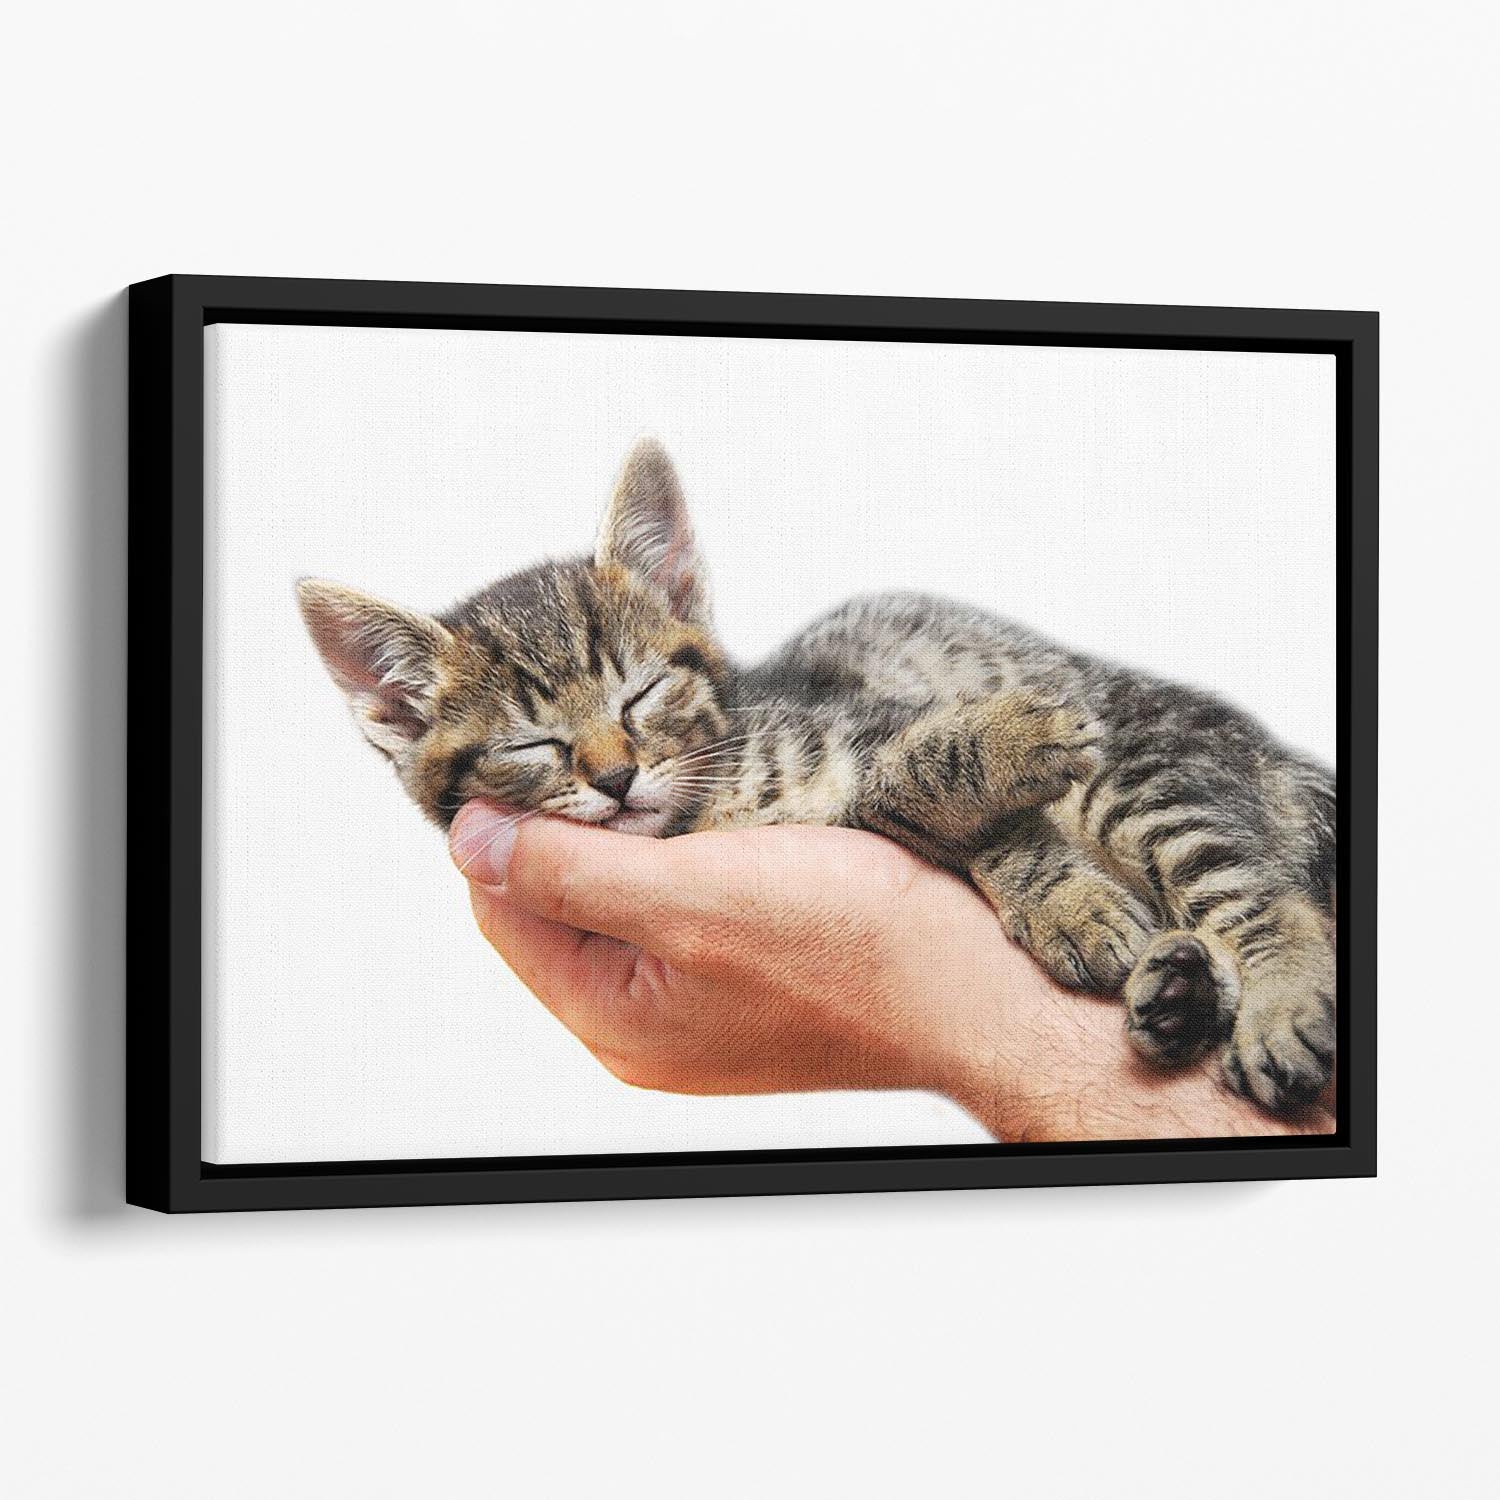 Little baby cat sleeping in male arms Floating Framed Canvas - Canvas Art Rocks - 1